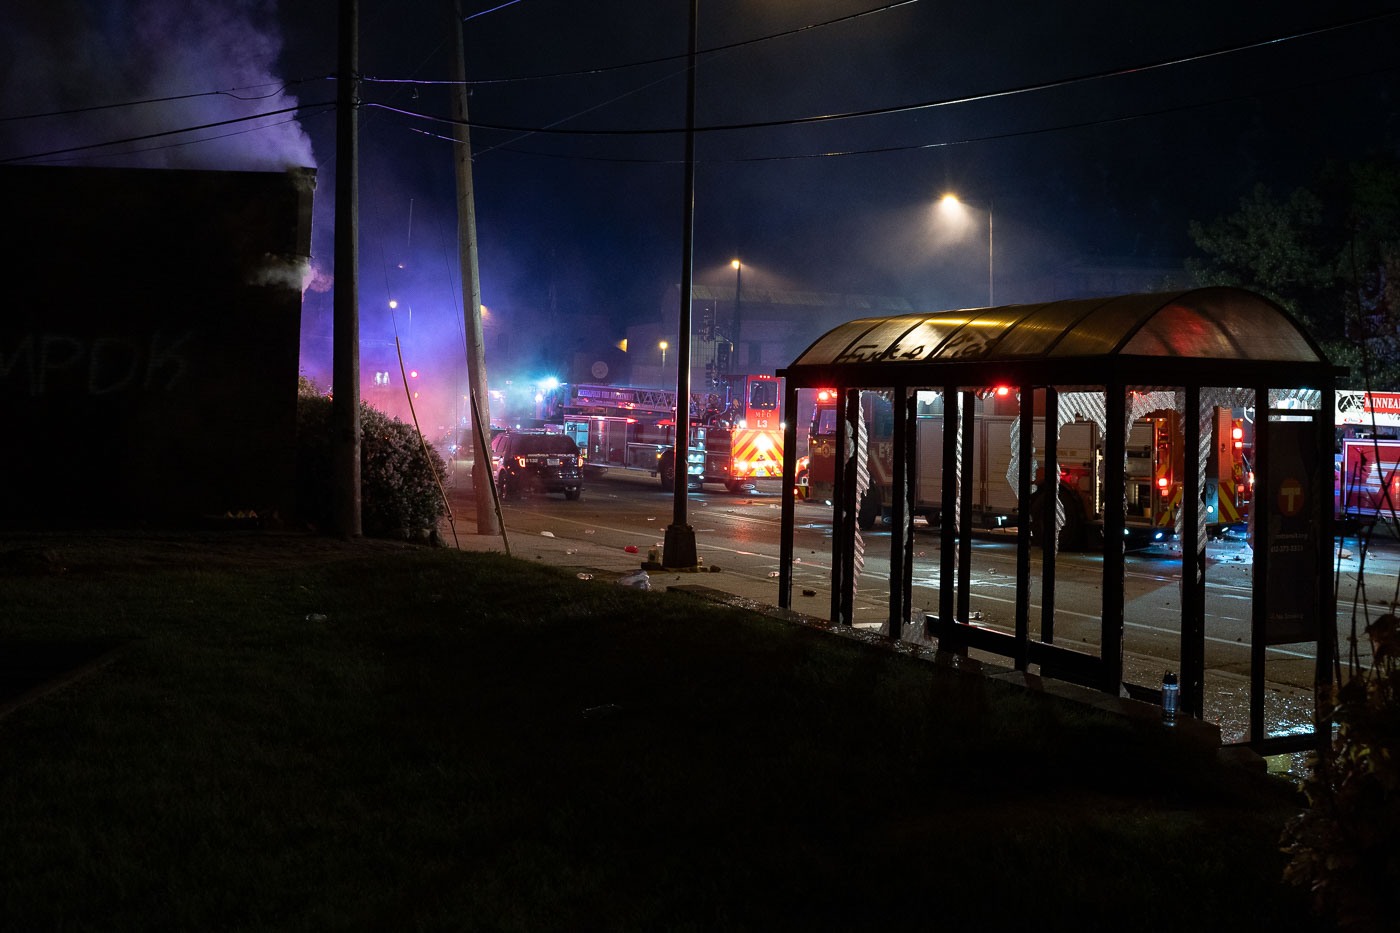 AutoZone on fire during Minneapolis riots